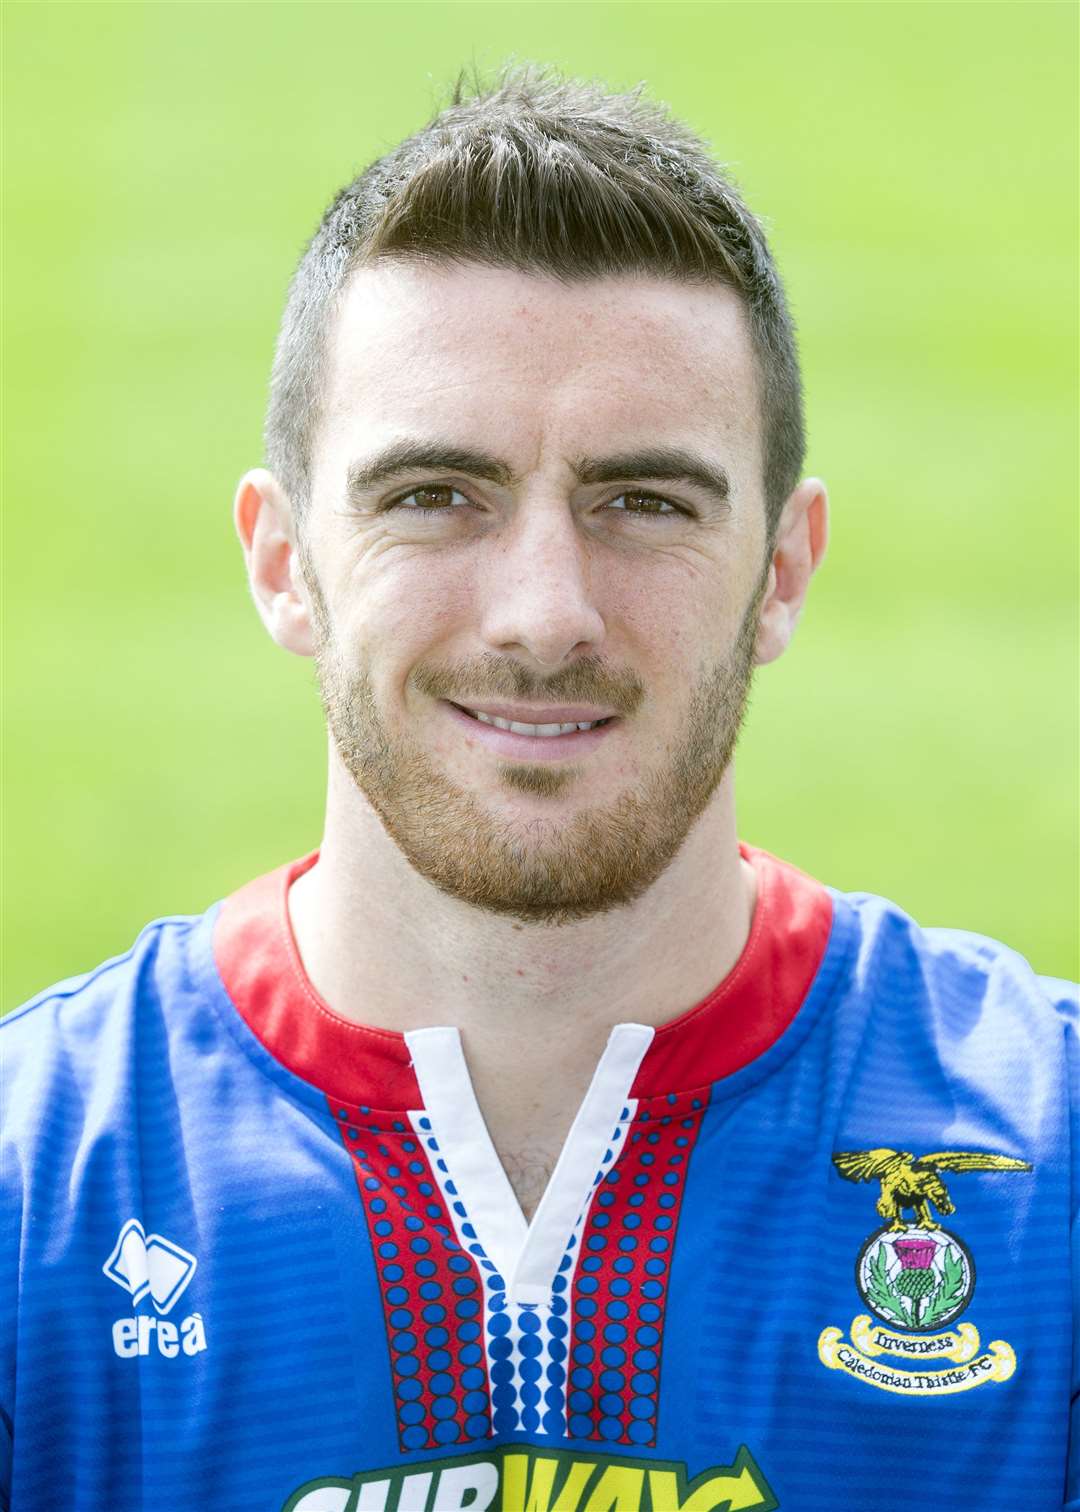 Ross Draper played 170 games for Caley Thistle between 2012 and 2017.